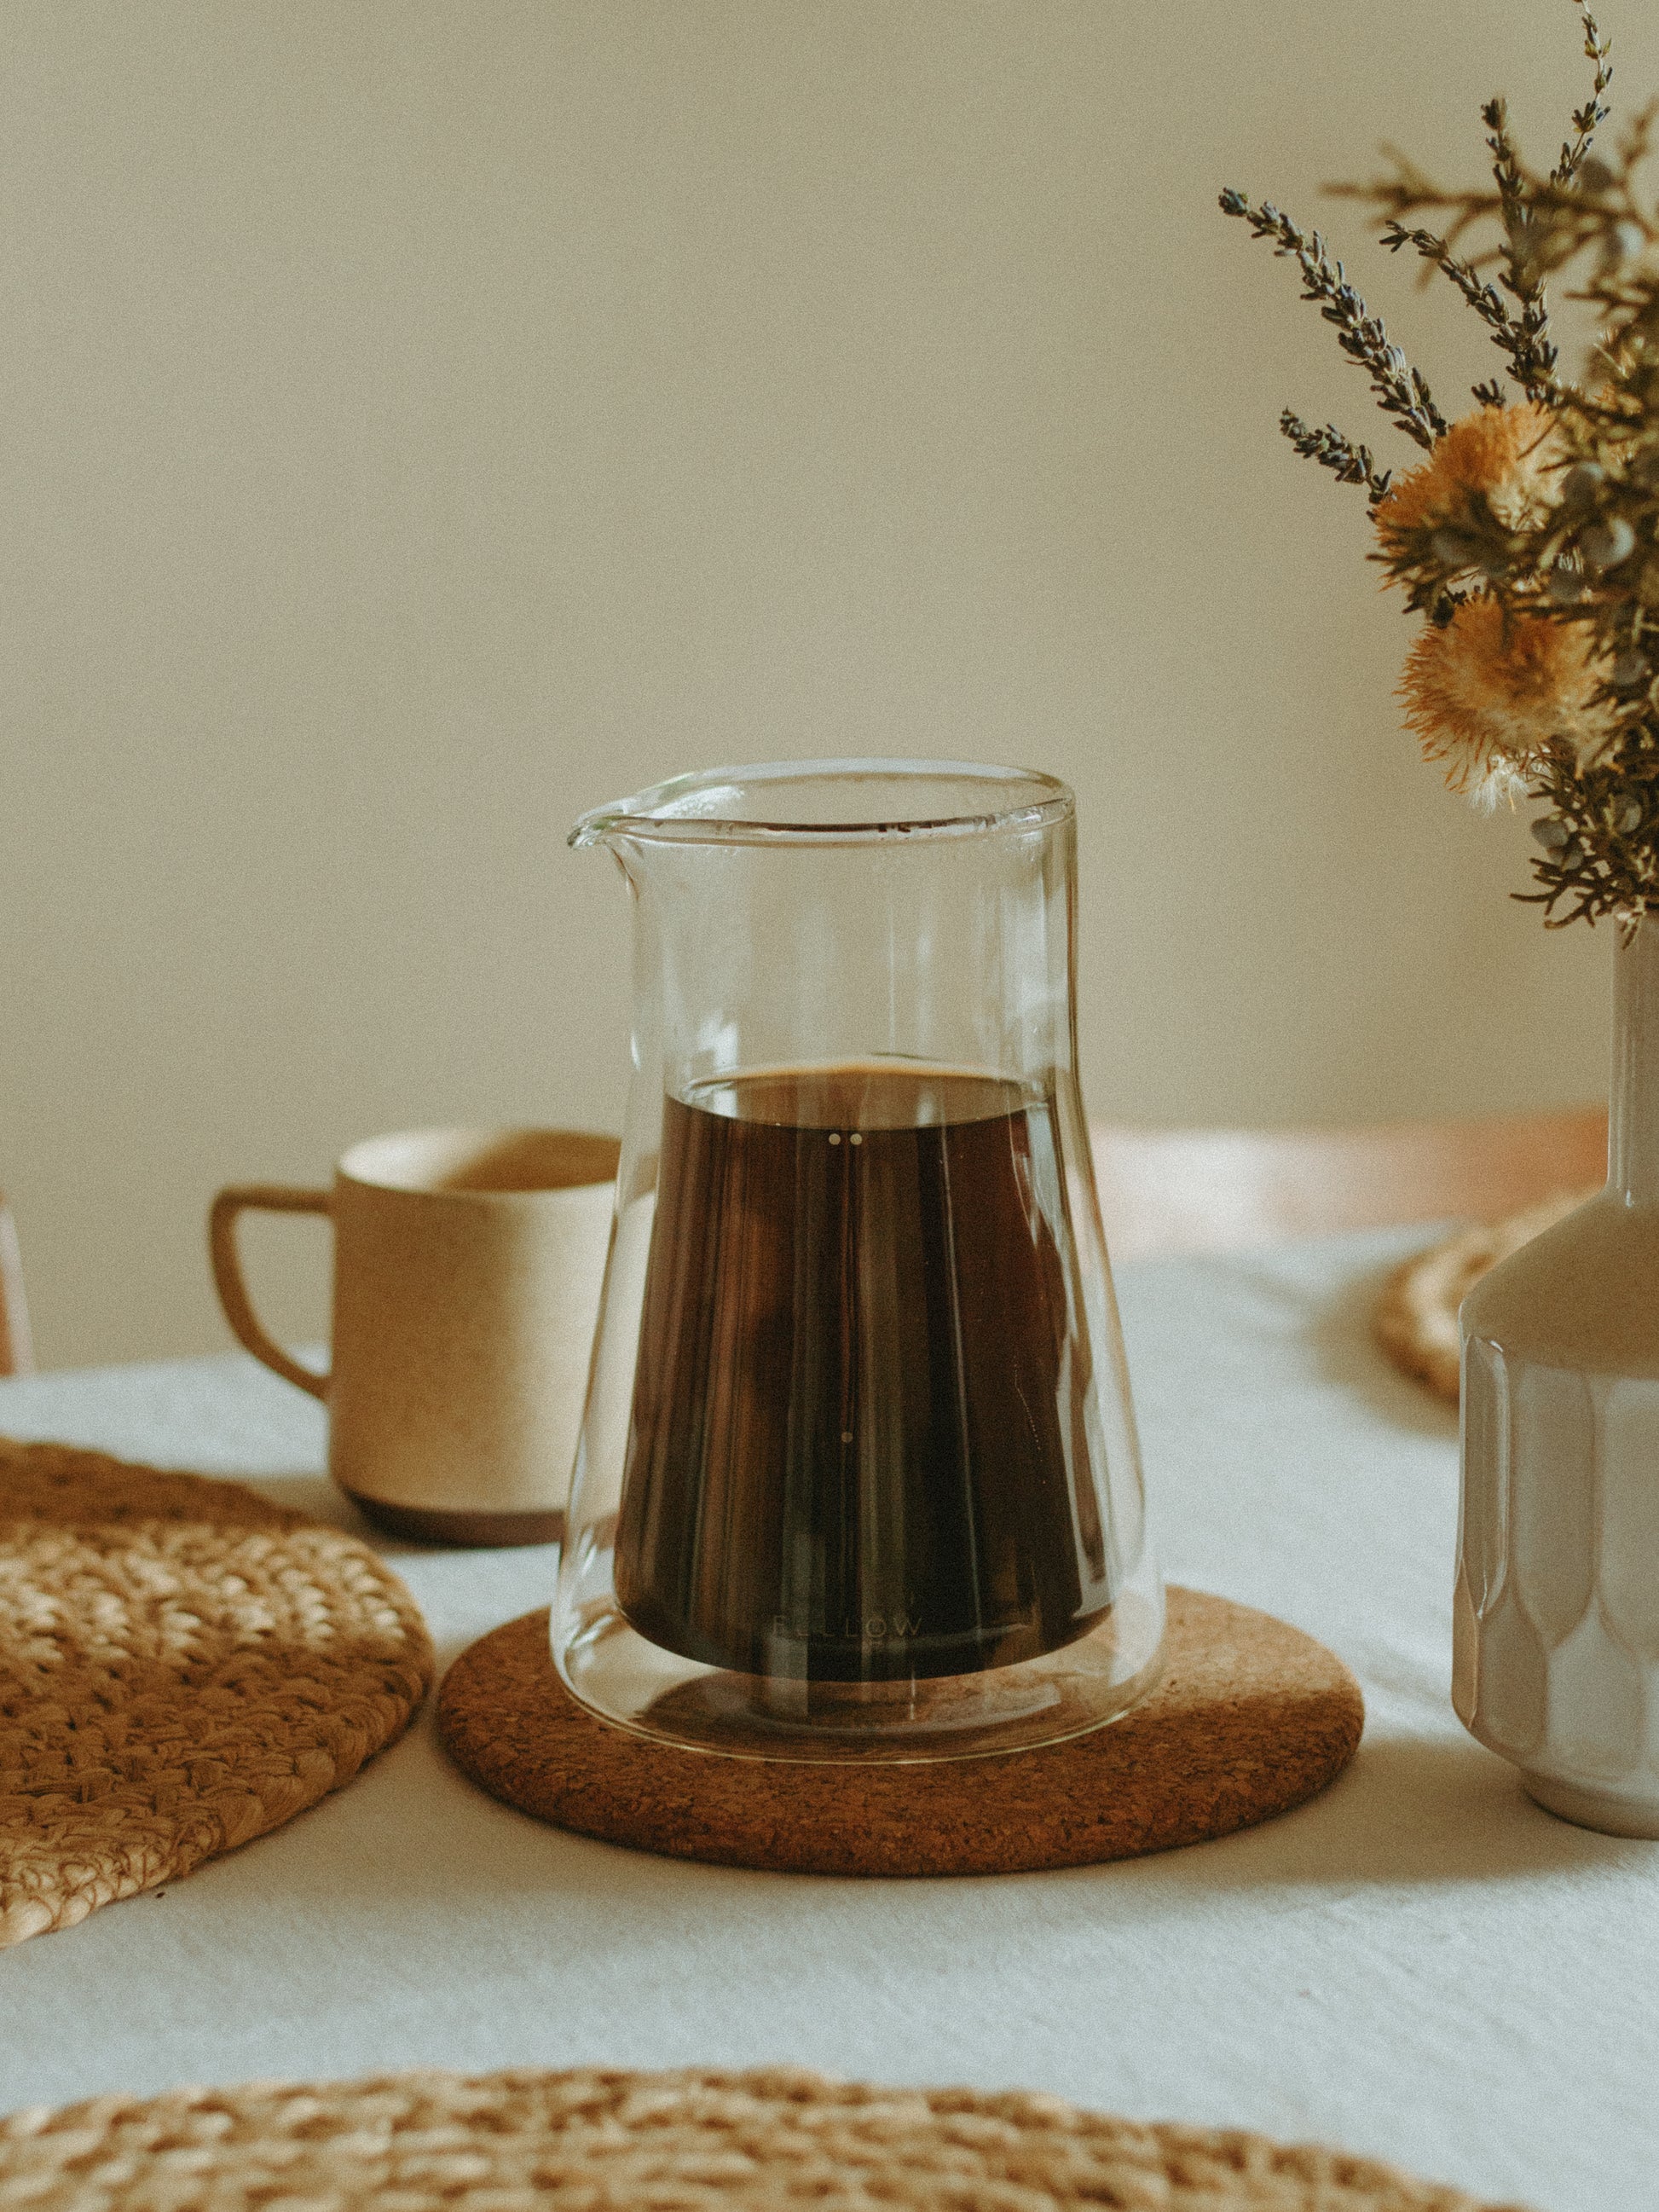 Fellow - Missing for months, Double Wall Glass Carafe is finally back in  stock! Fits like a glove for brewing with an AeroPress Coffee Maker, Stagg  [X] Dripper, and Stagg [XF] Dripper